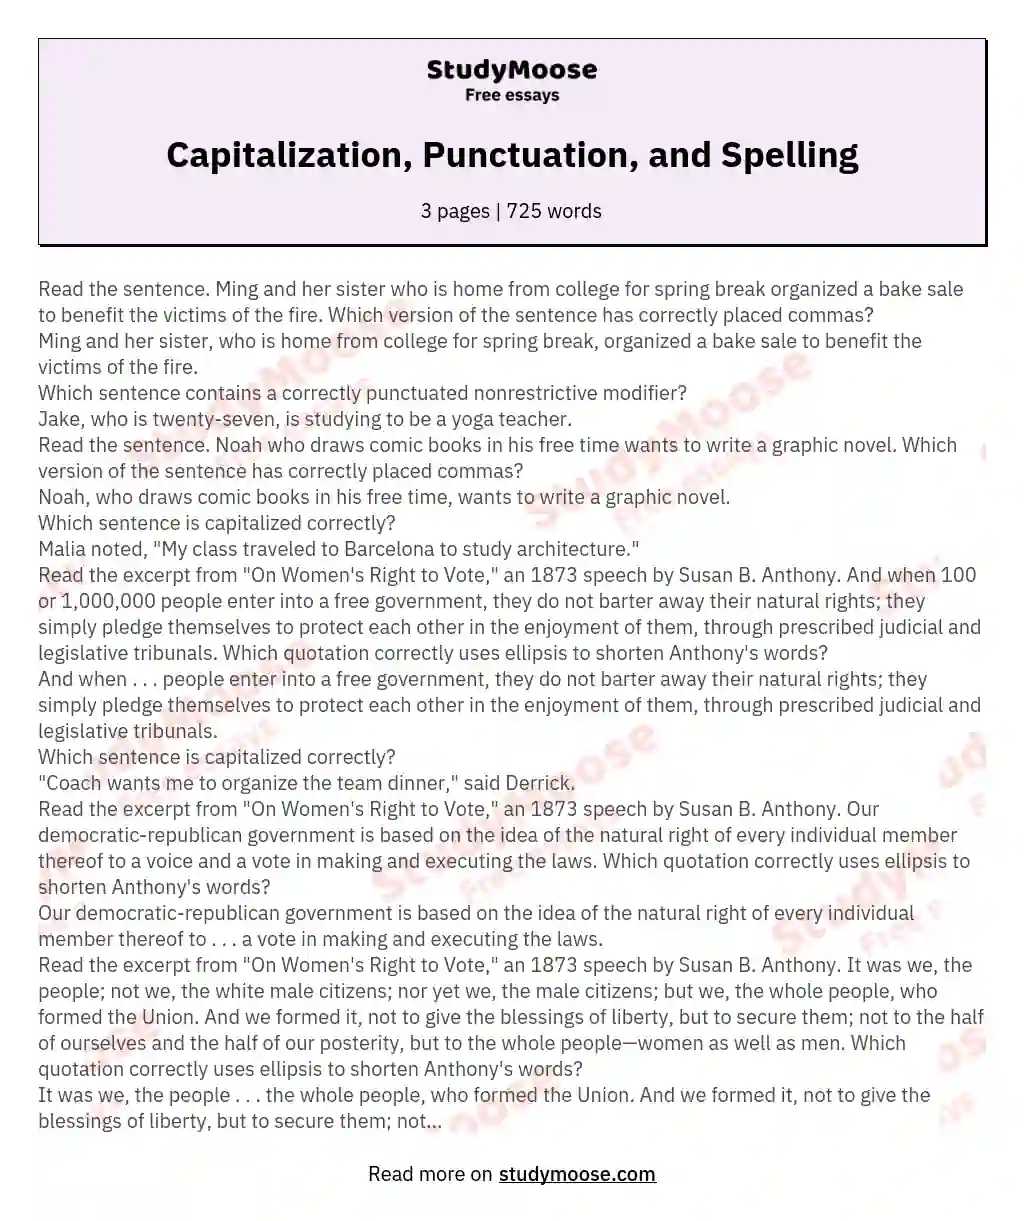 Capitalization, Punctuation, and Spelling